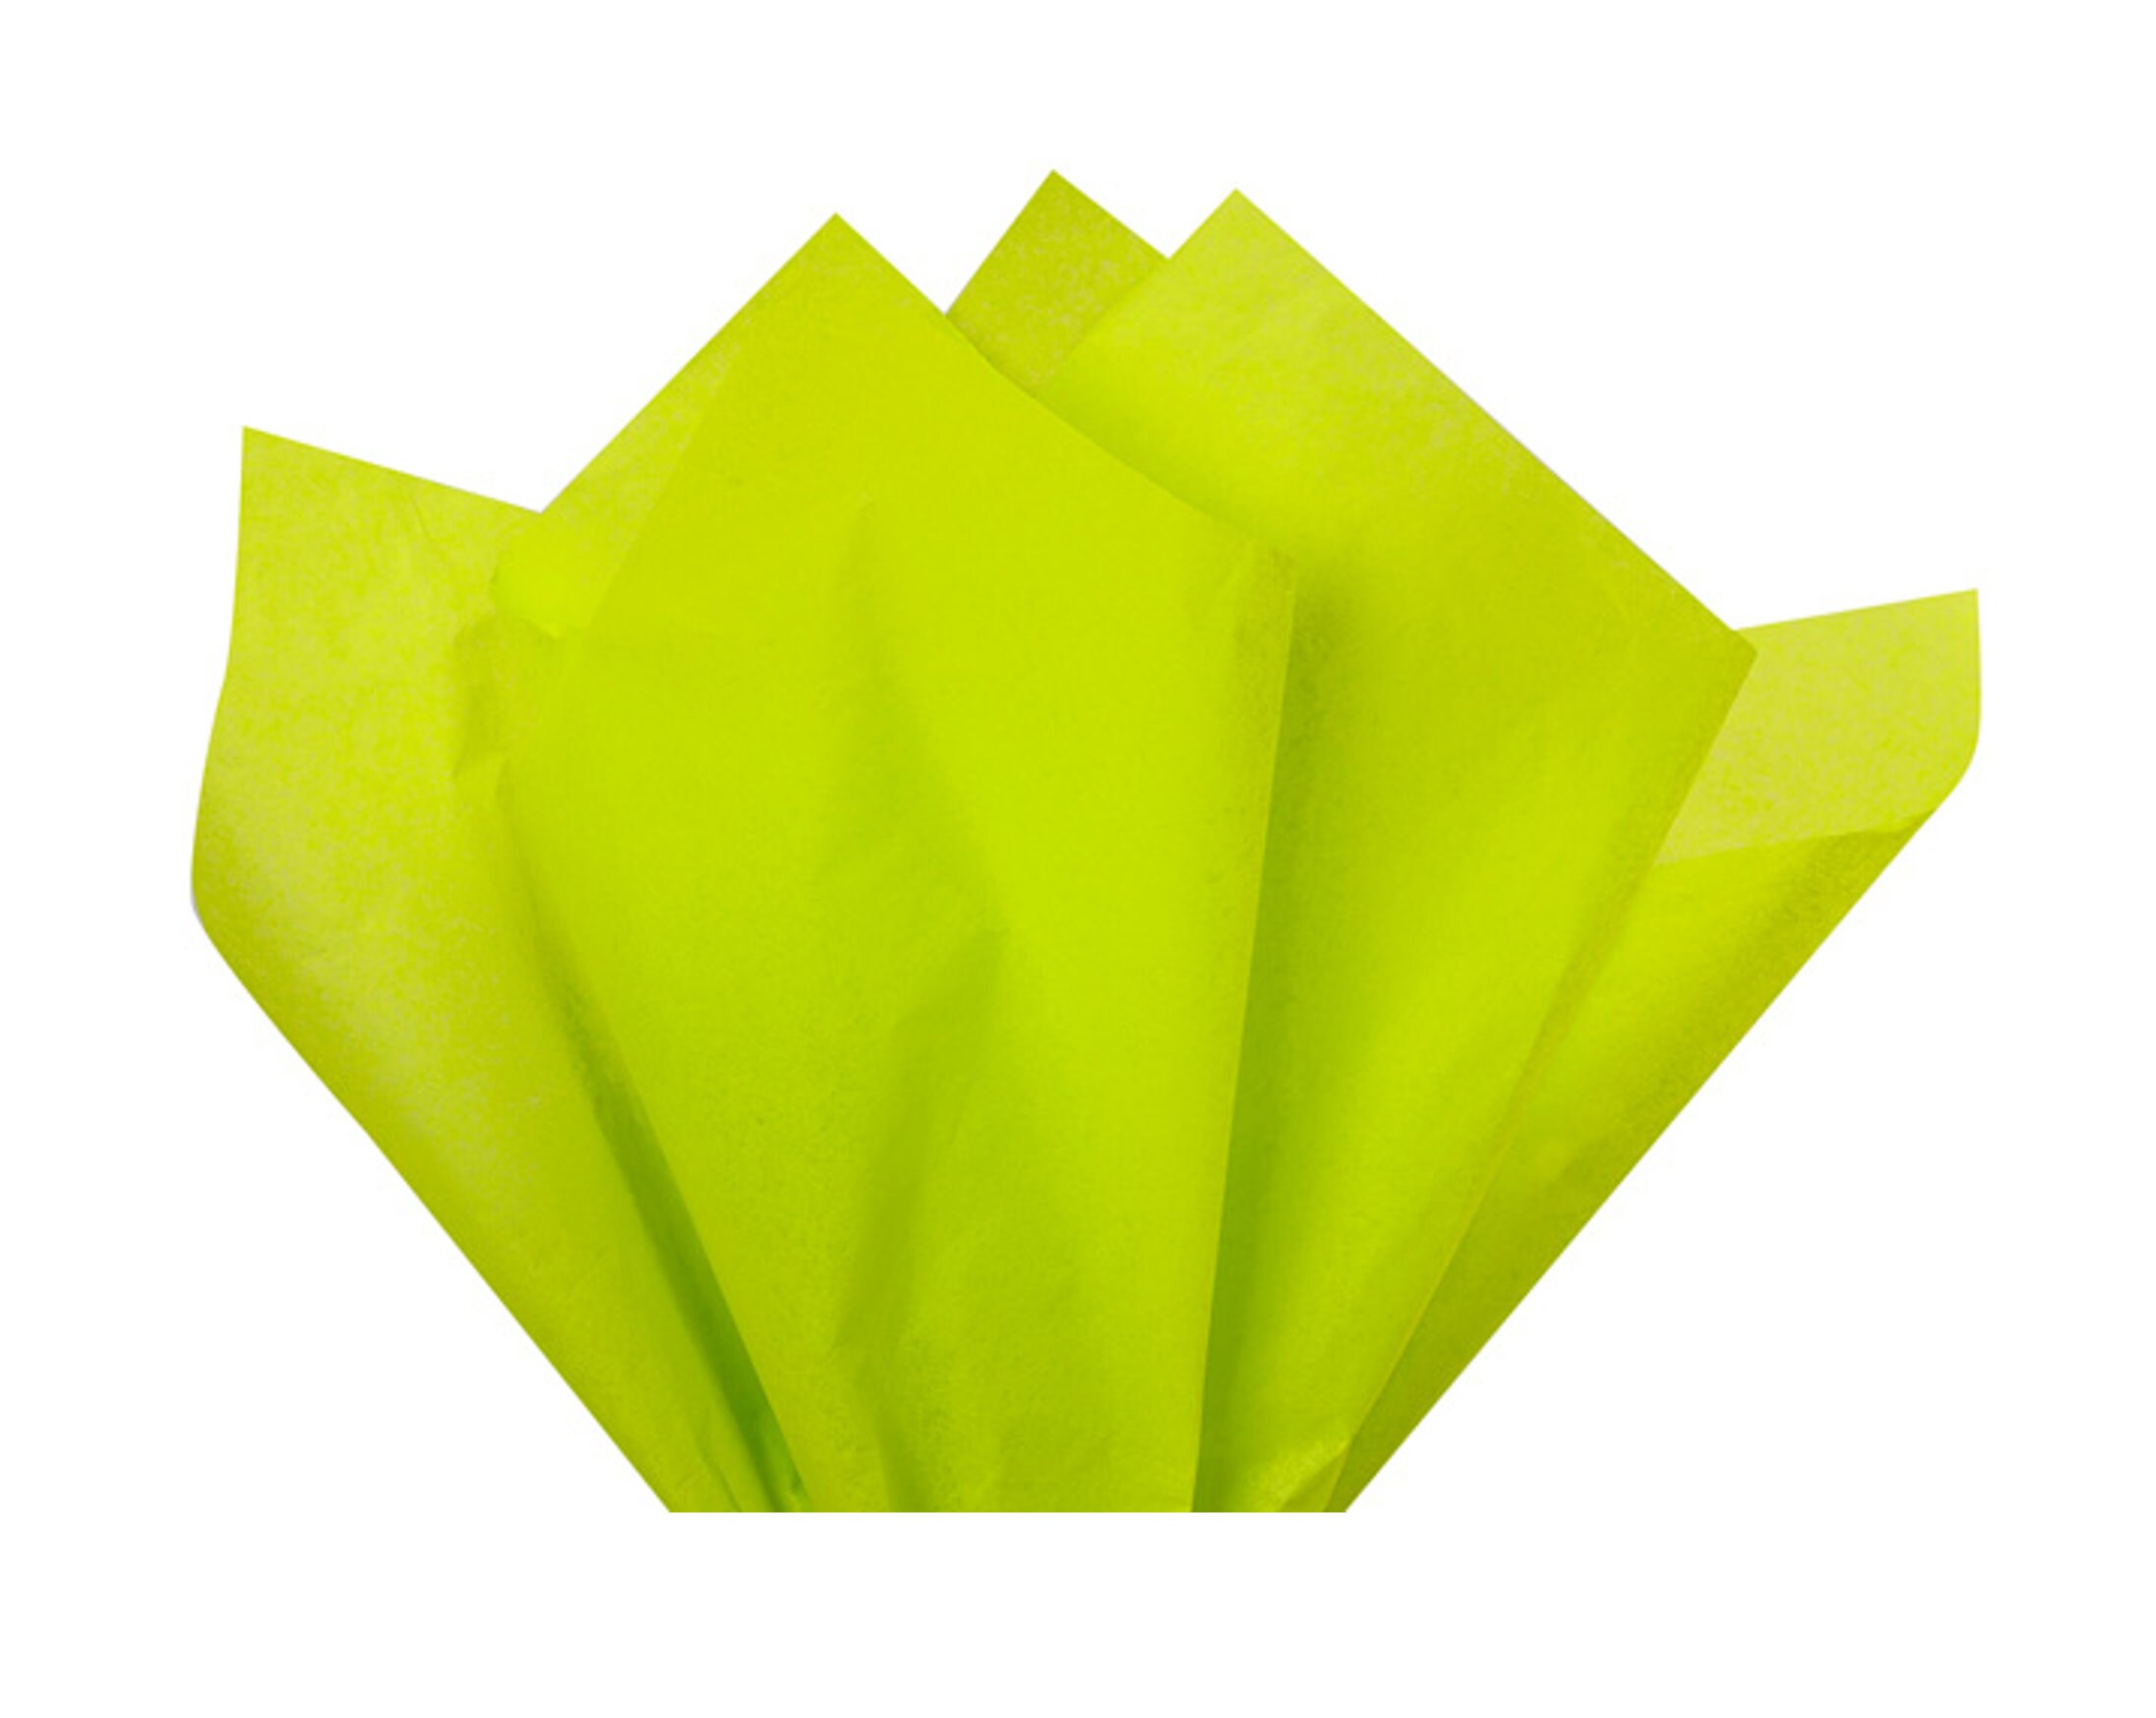 Forest Green Tissue Paper 15 Inch X 20 Inch - 100 Sheets Premium Quality  Tissue Paper by A1 bakery supplies Made in USA